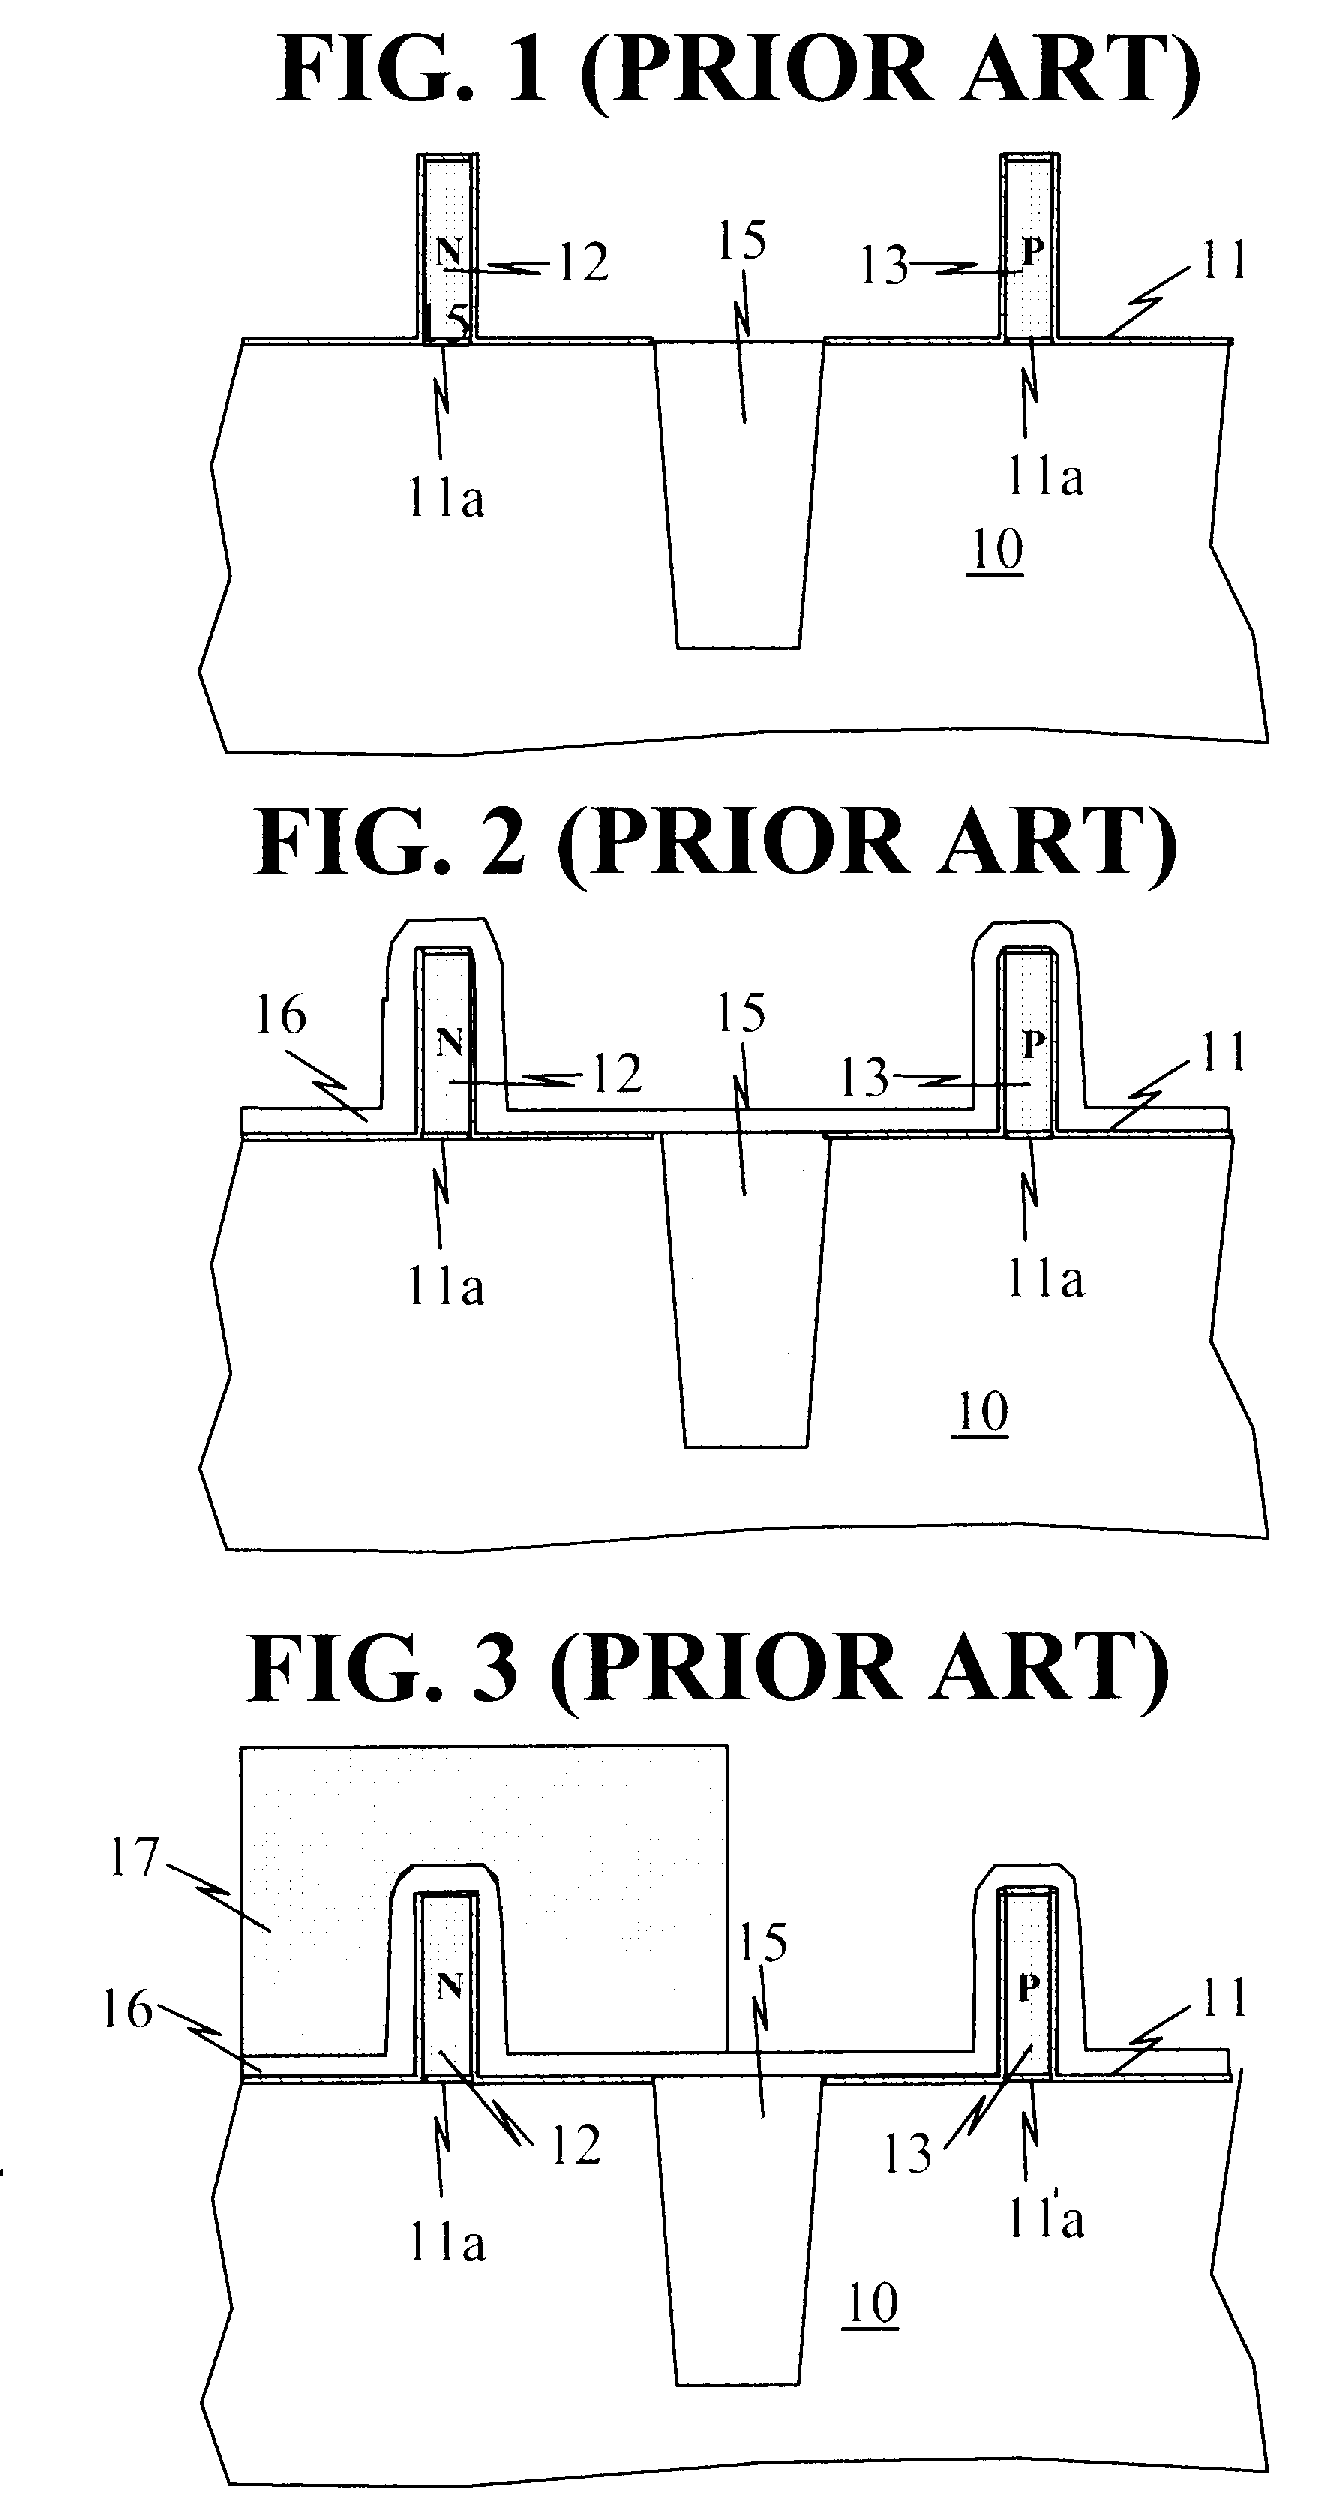 METHOD OF DOPING FIELD-EFFECT-TRANSISTORS (FETs) WITH REDUCED STRESS/STRAIN RELAXATION AND RESULTING FET DEVICES